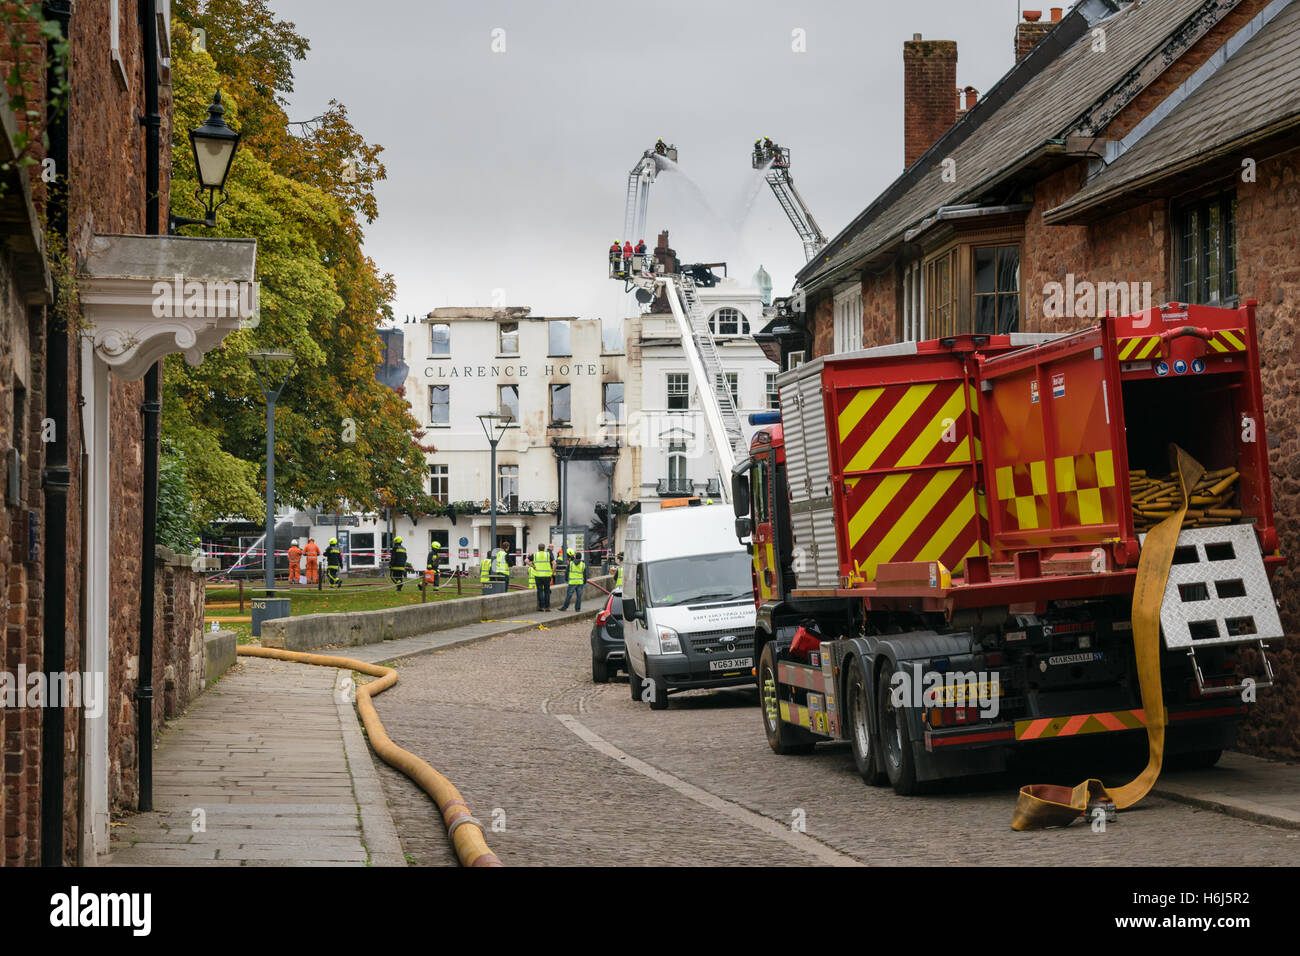 Exeter, Devon, England, UK - 29 October 2016: View of what is left of the Royal Clarence Hotel facade while the firemen keep the fire under control. The hotel is the oldest one in England. Credit: Cristina Neacsu/Alamy Live News Stock Photo